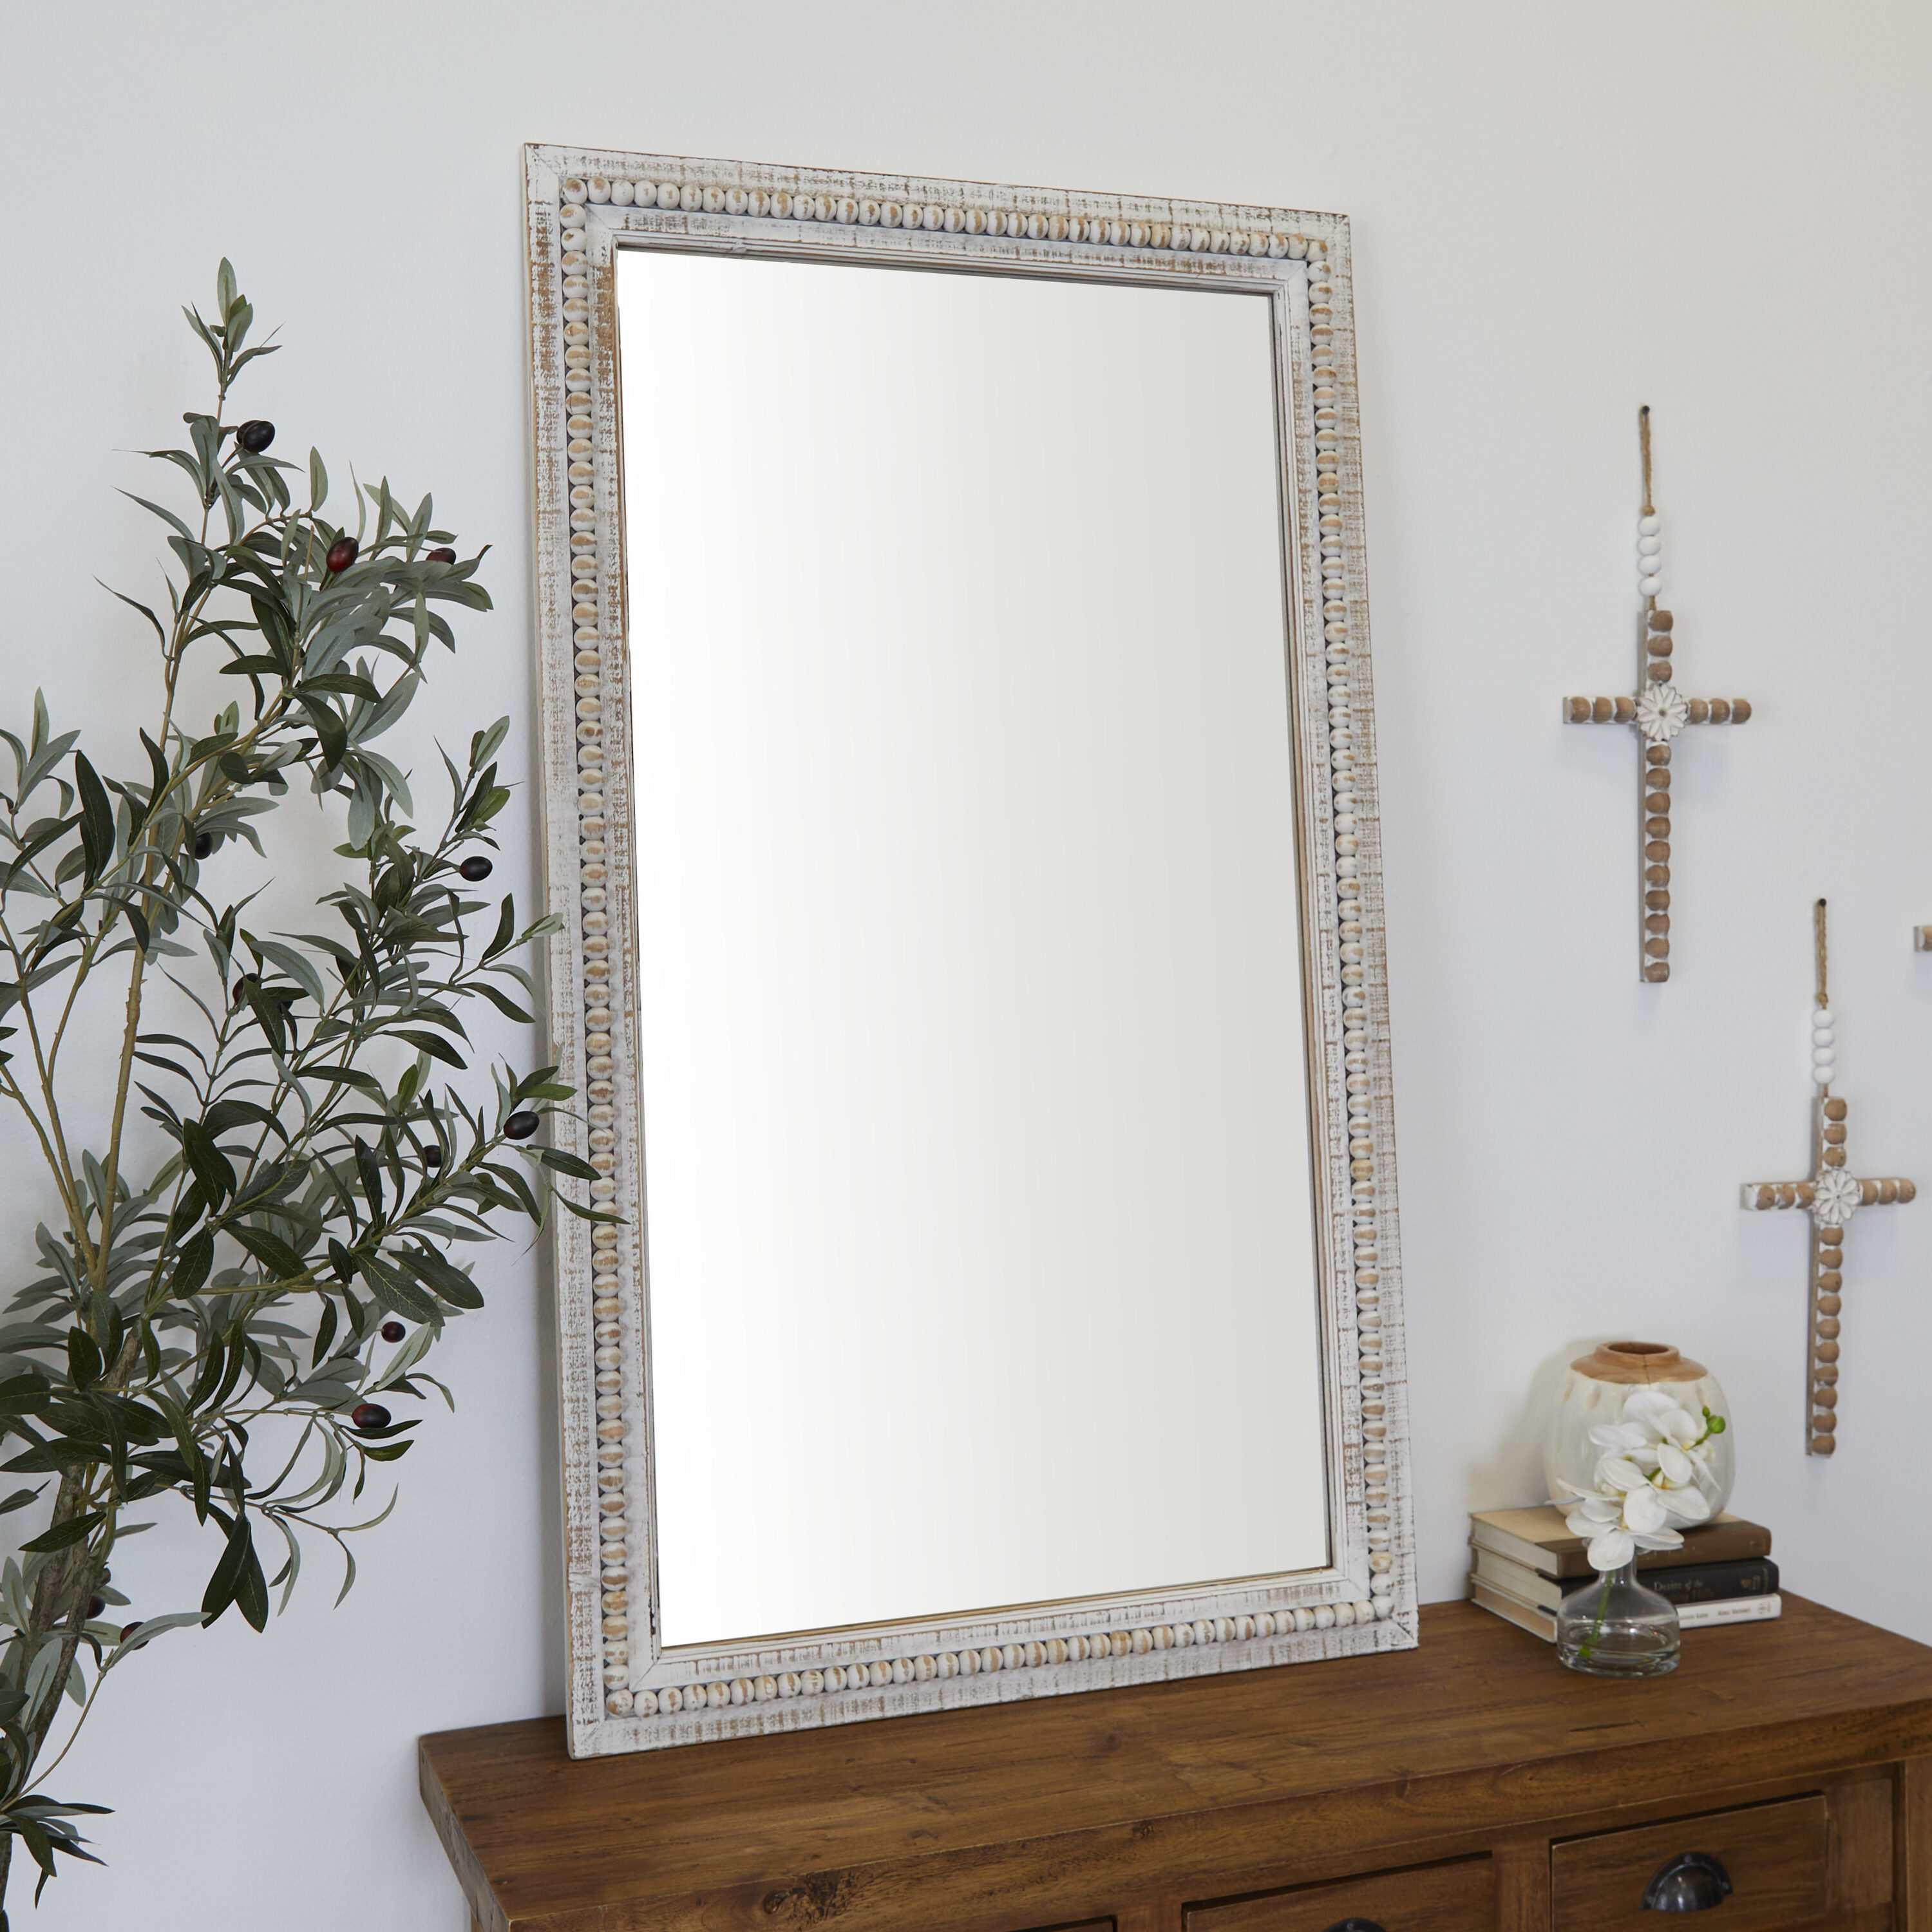 White Carved Exclusive Mirror Frames, Size/Dimension: 2.5 Feet at